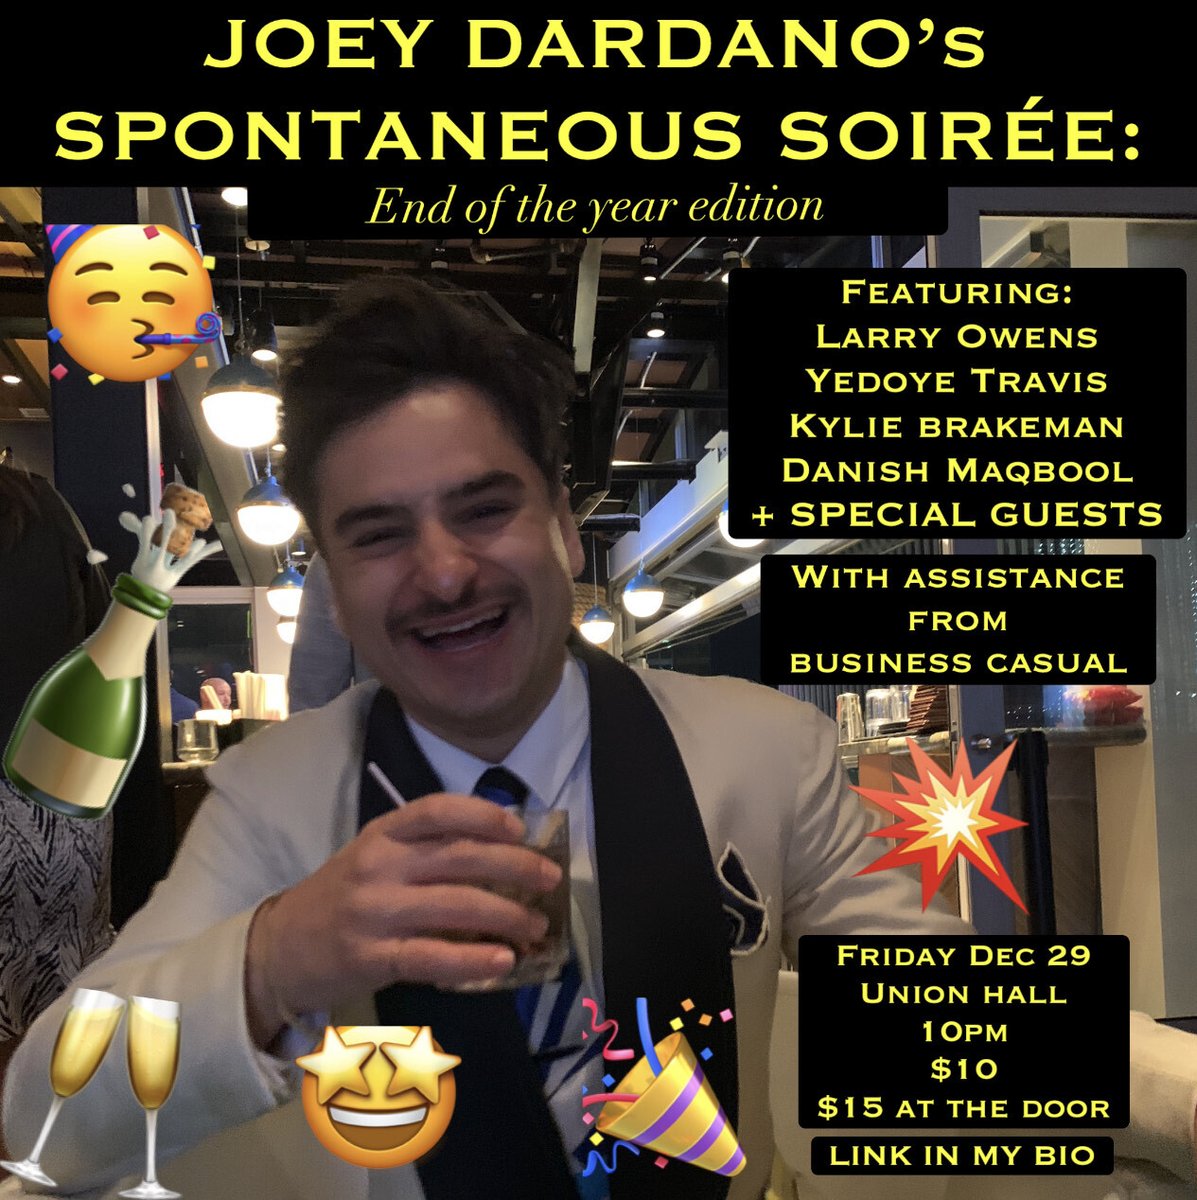 FRI 12/29: @JoeyDardano's Spontaneous Soirée: End of the Year Edition! Featuring Special Guests: 🥂 @larryowenslive 🥂 @yedoye_ 🥂 @dmaq1 🥂 @deadeyebrakeman 🥂 @BUS1NESSCASUAL 🎟️: tinyurl.com/yay8a367